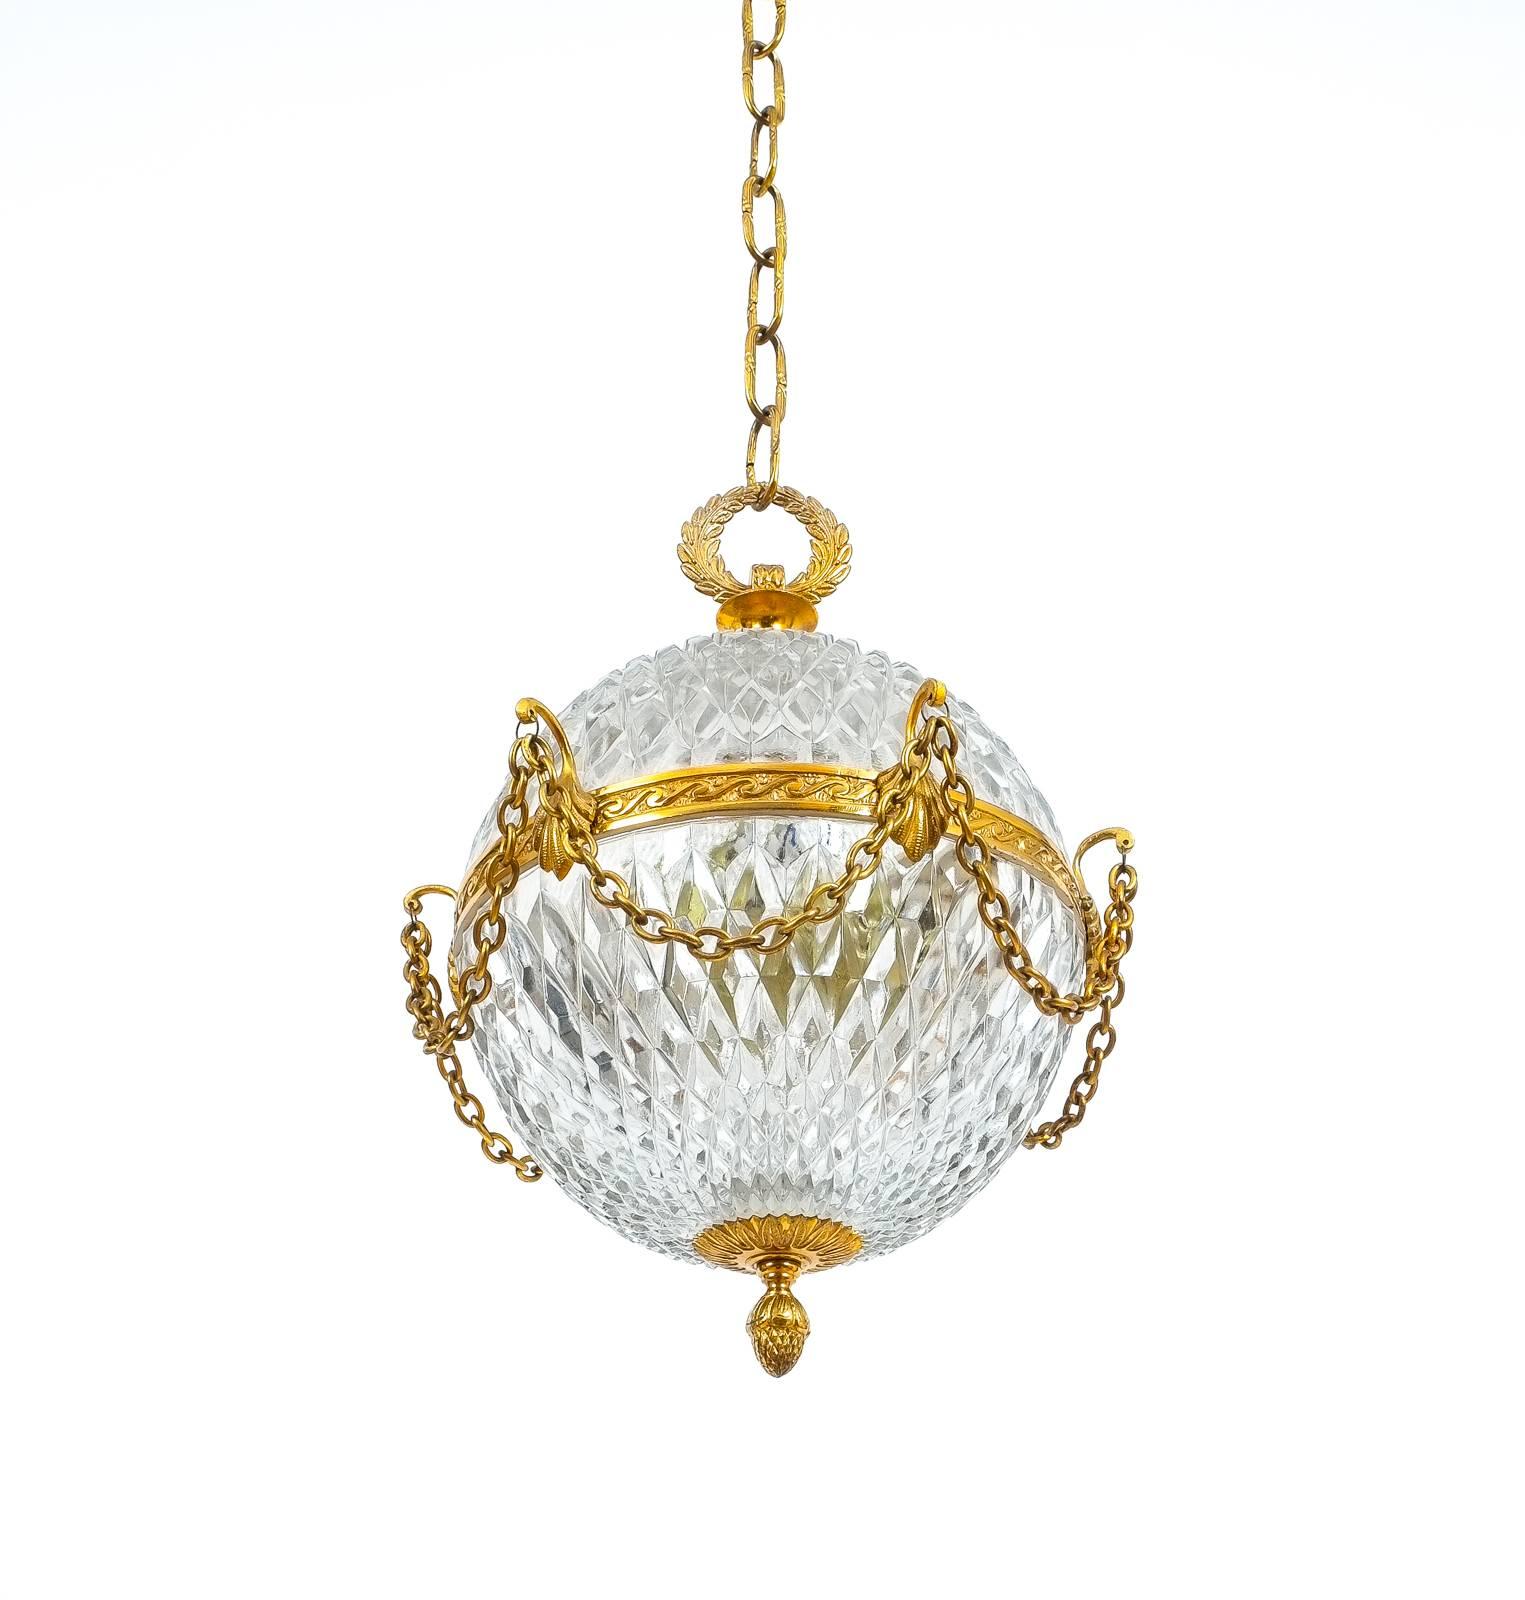 French Beautiful Pair of Neo-Empire Pendant Lights from Glass and Brass